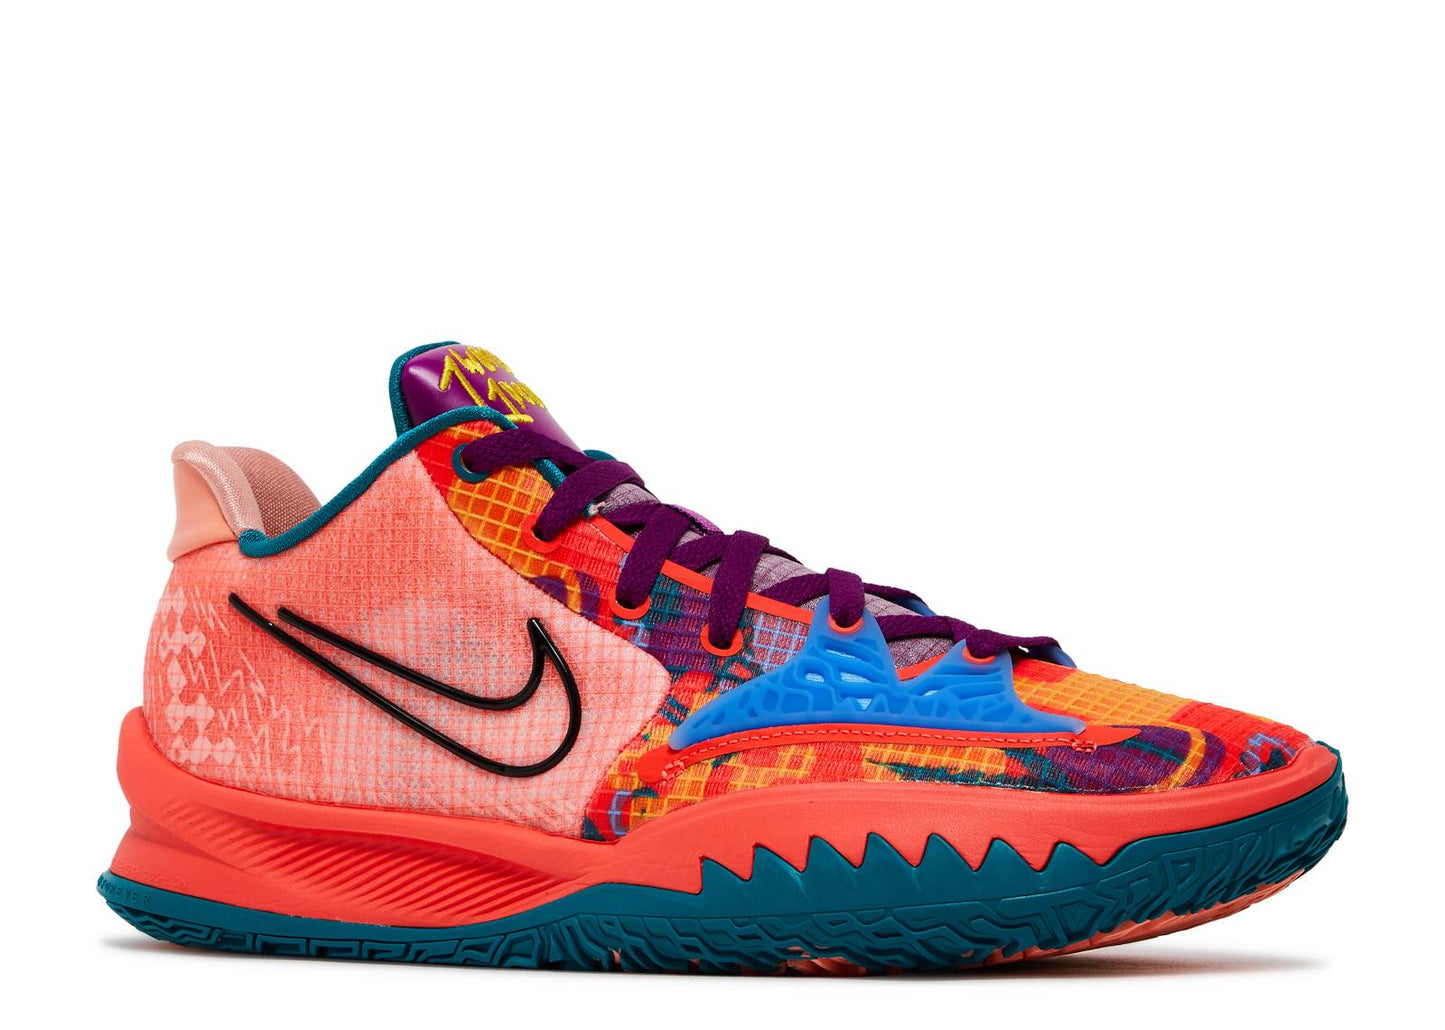 Nike Kyrie Low 4 EP "1 World 1 People"